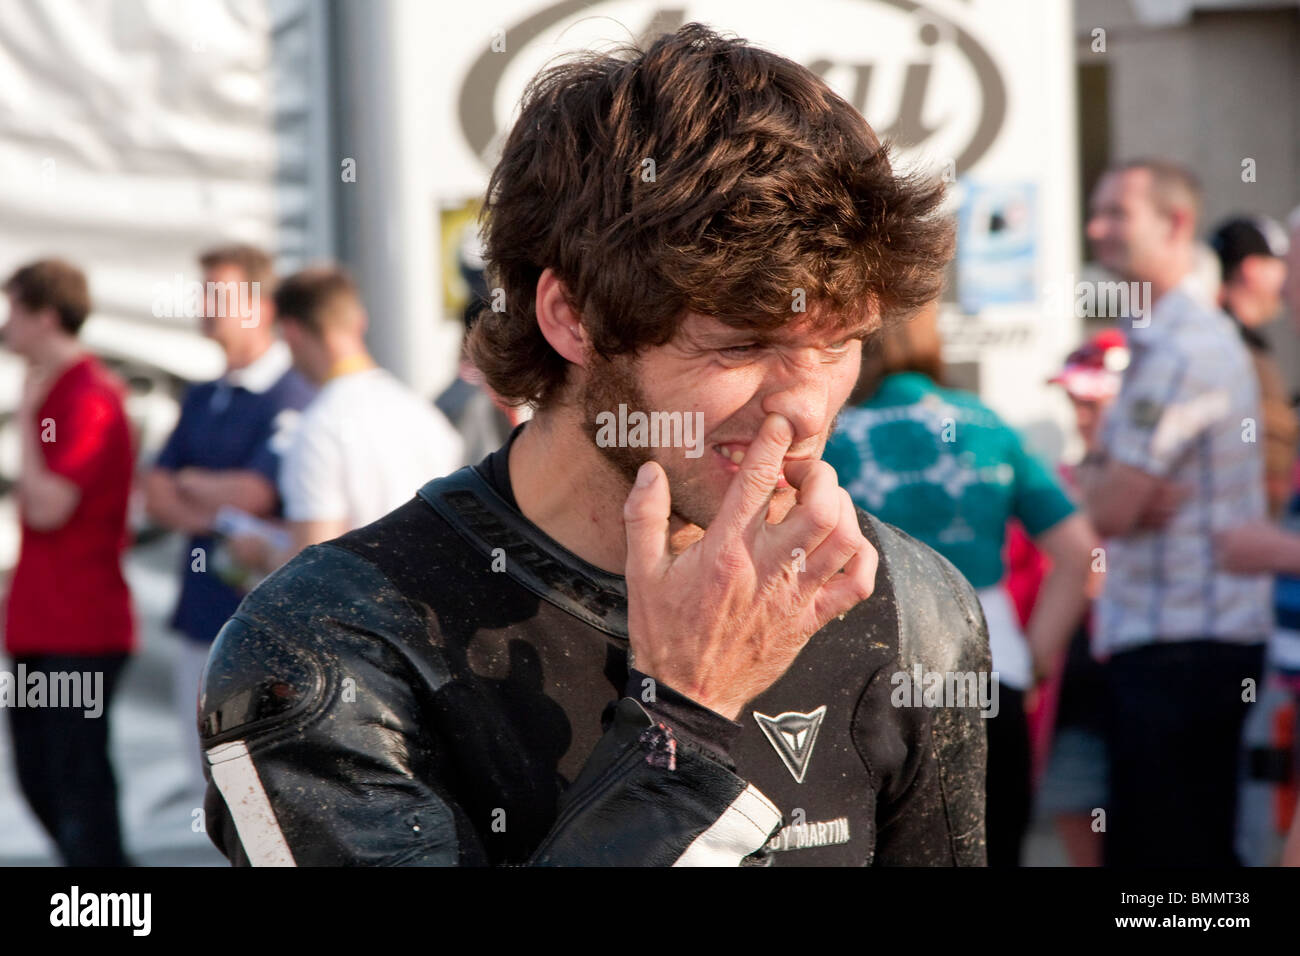 Guy Martin at the 2010 Isle of Man TT picking his nose the week before his explosive accident. Stock Photo